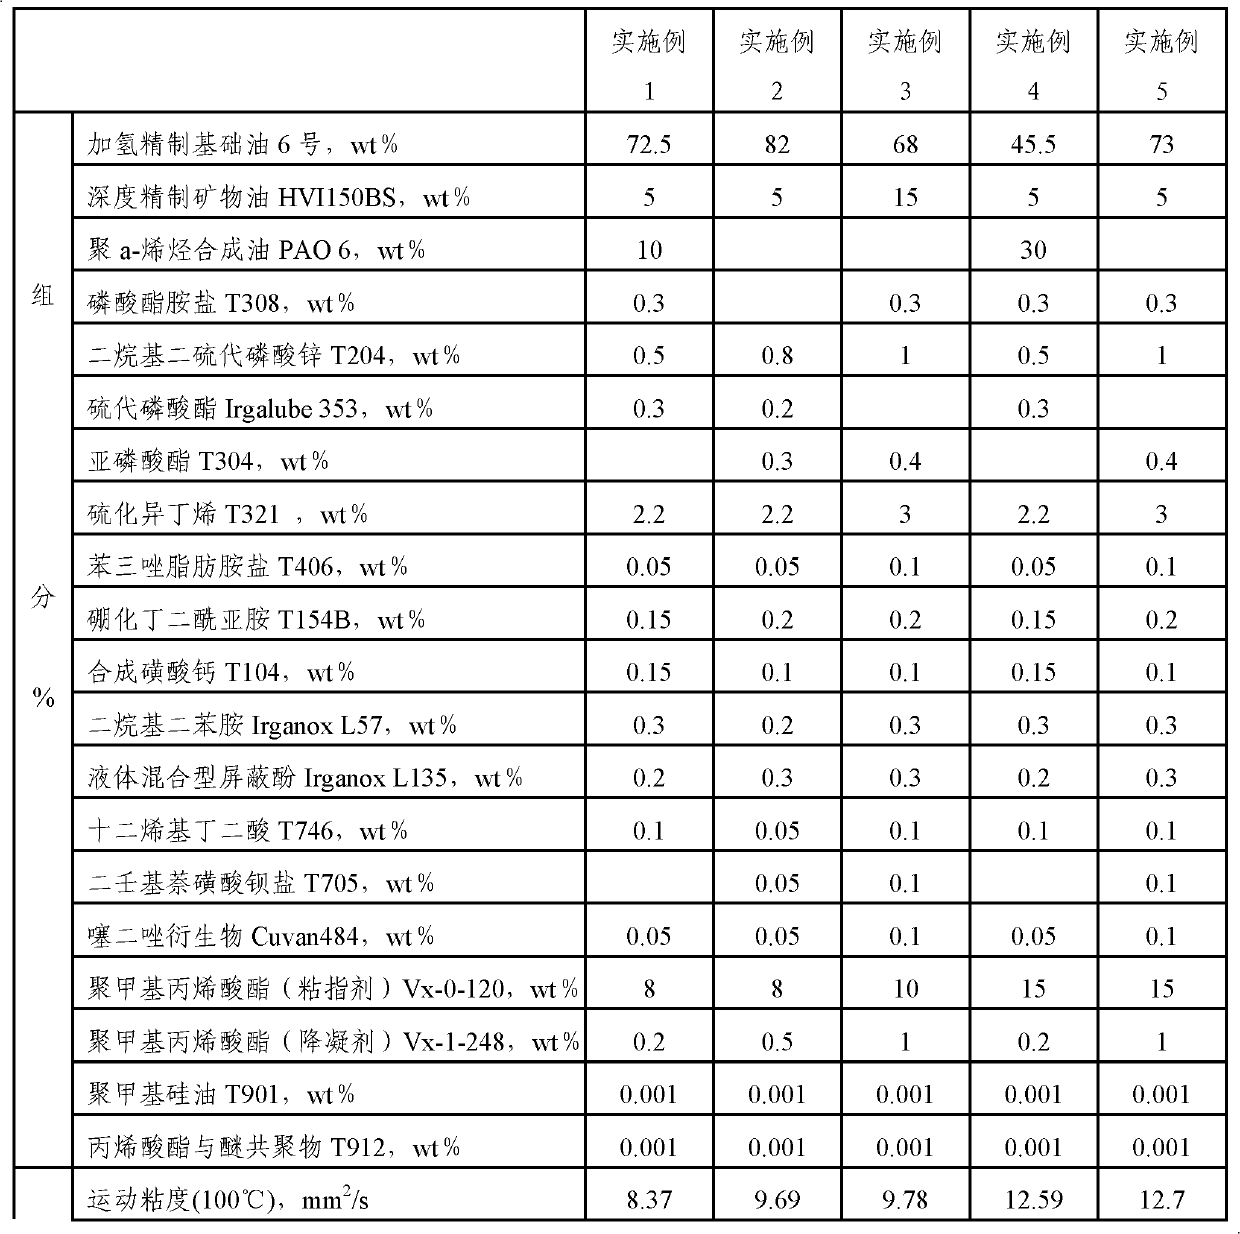 Manual transmission lubricating oil composition